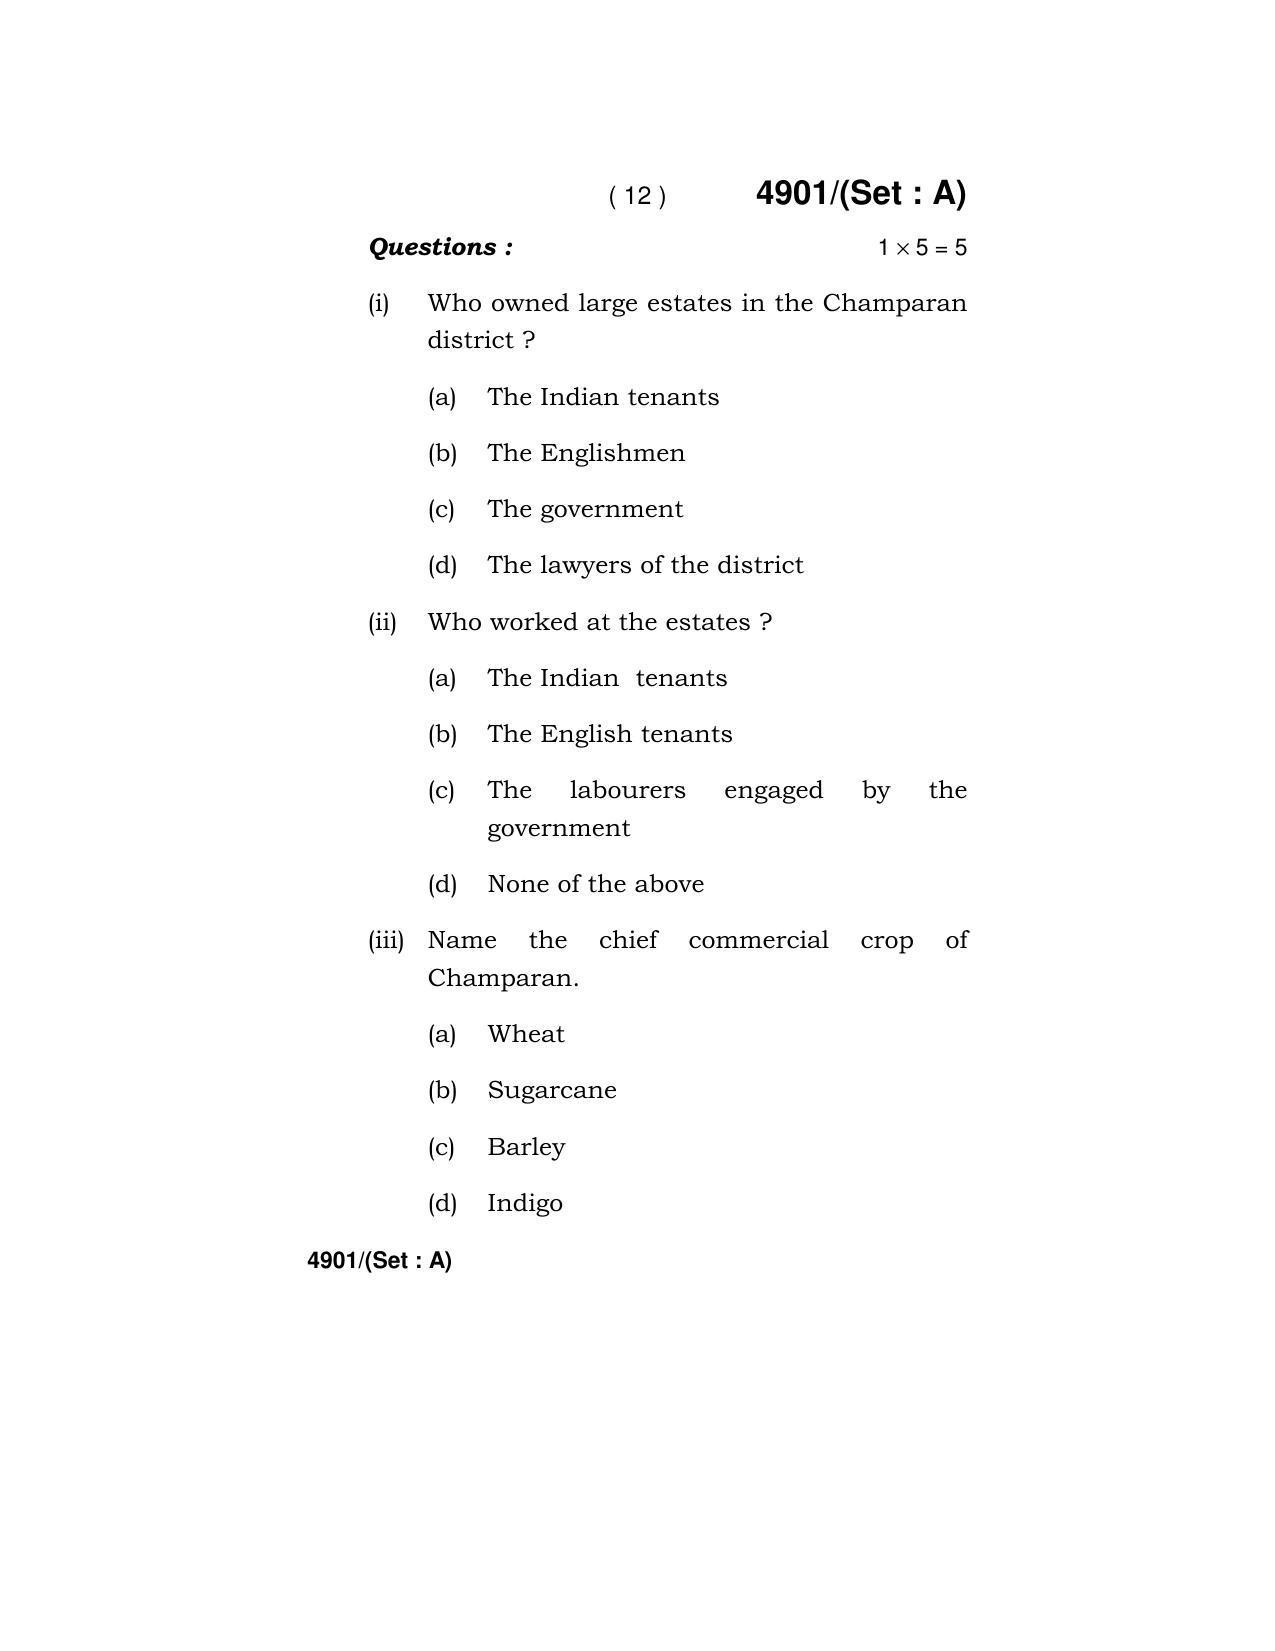 Haryana Board HBSE Class 12 English Core 2020 Question Paper - Page 12